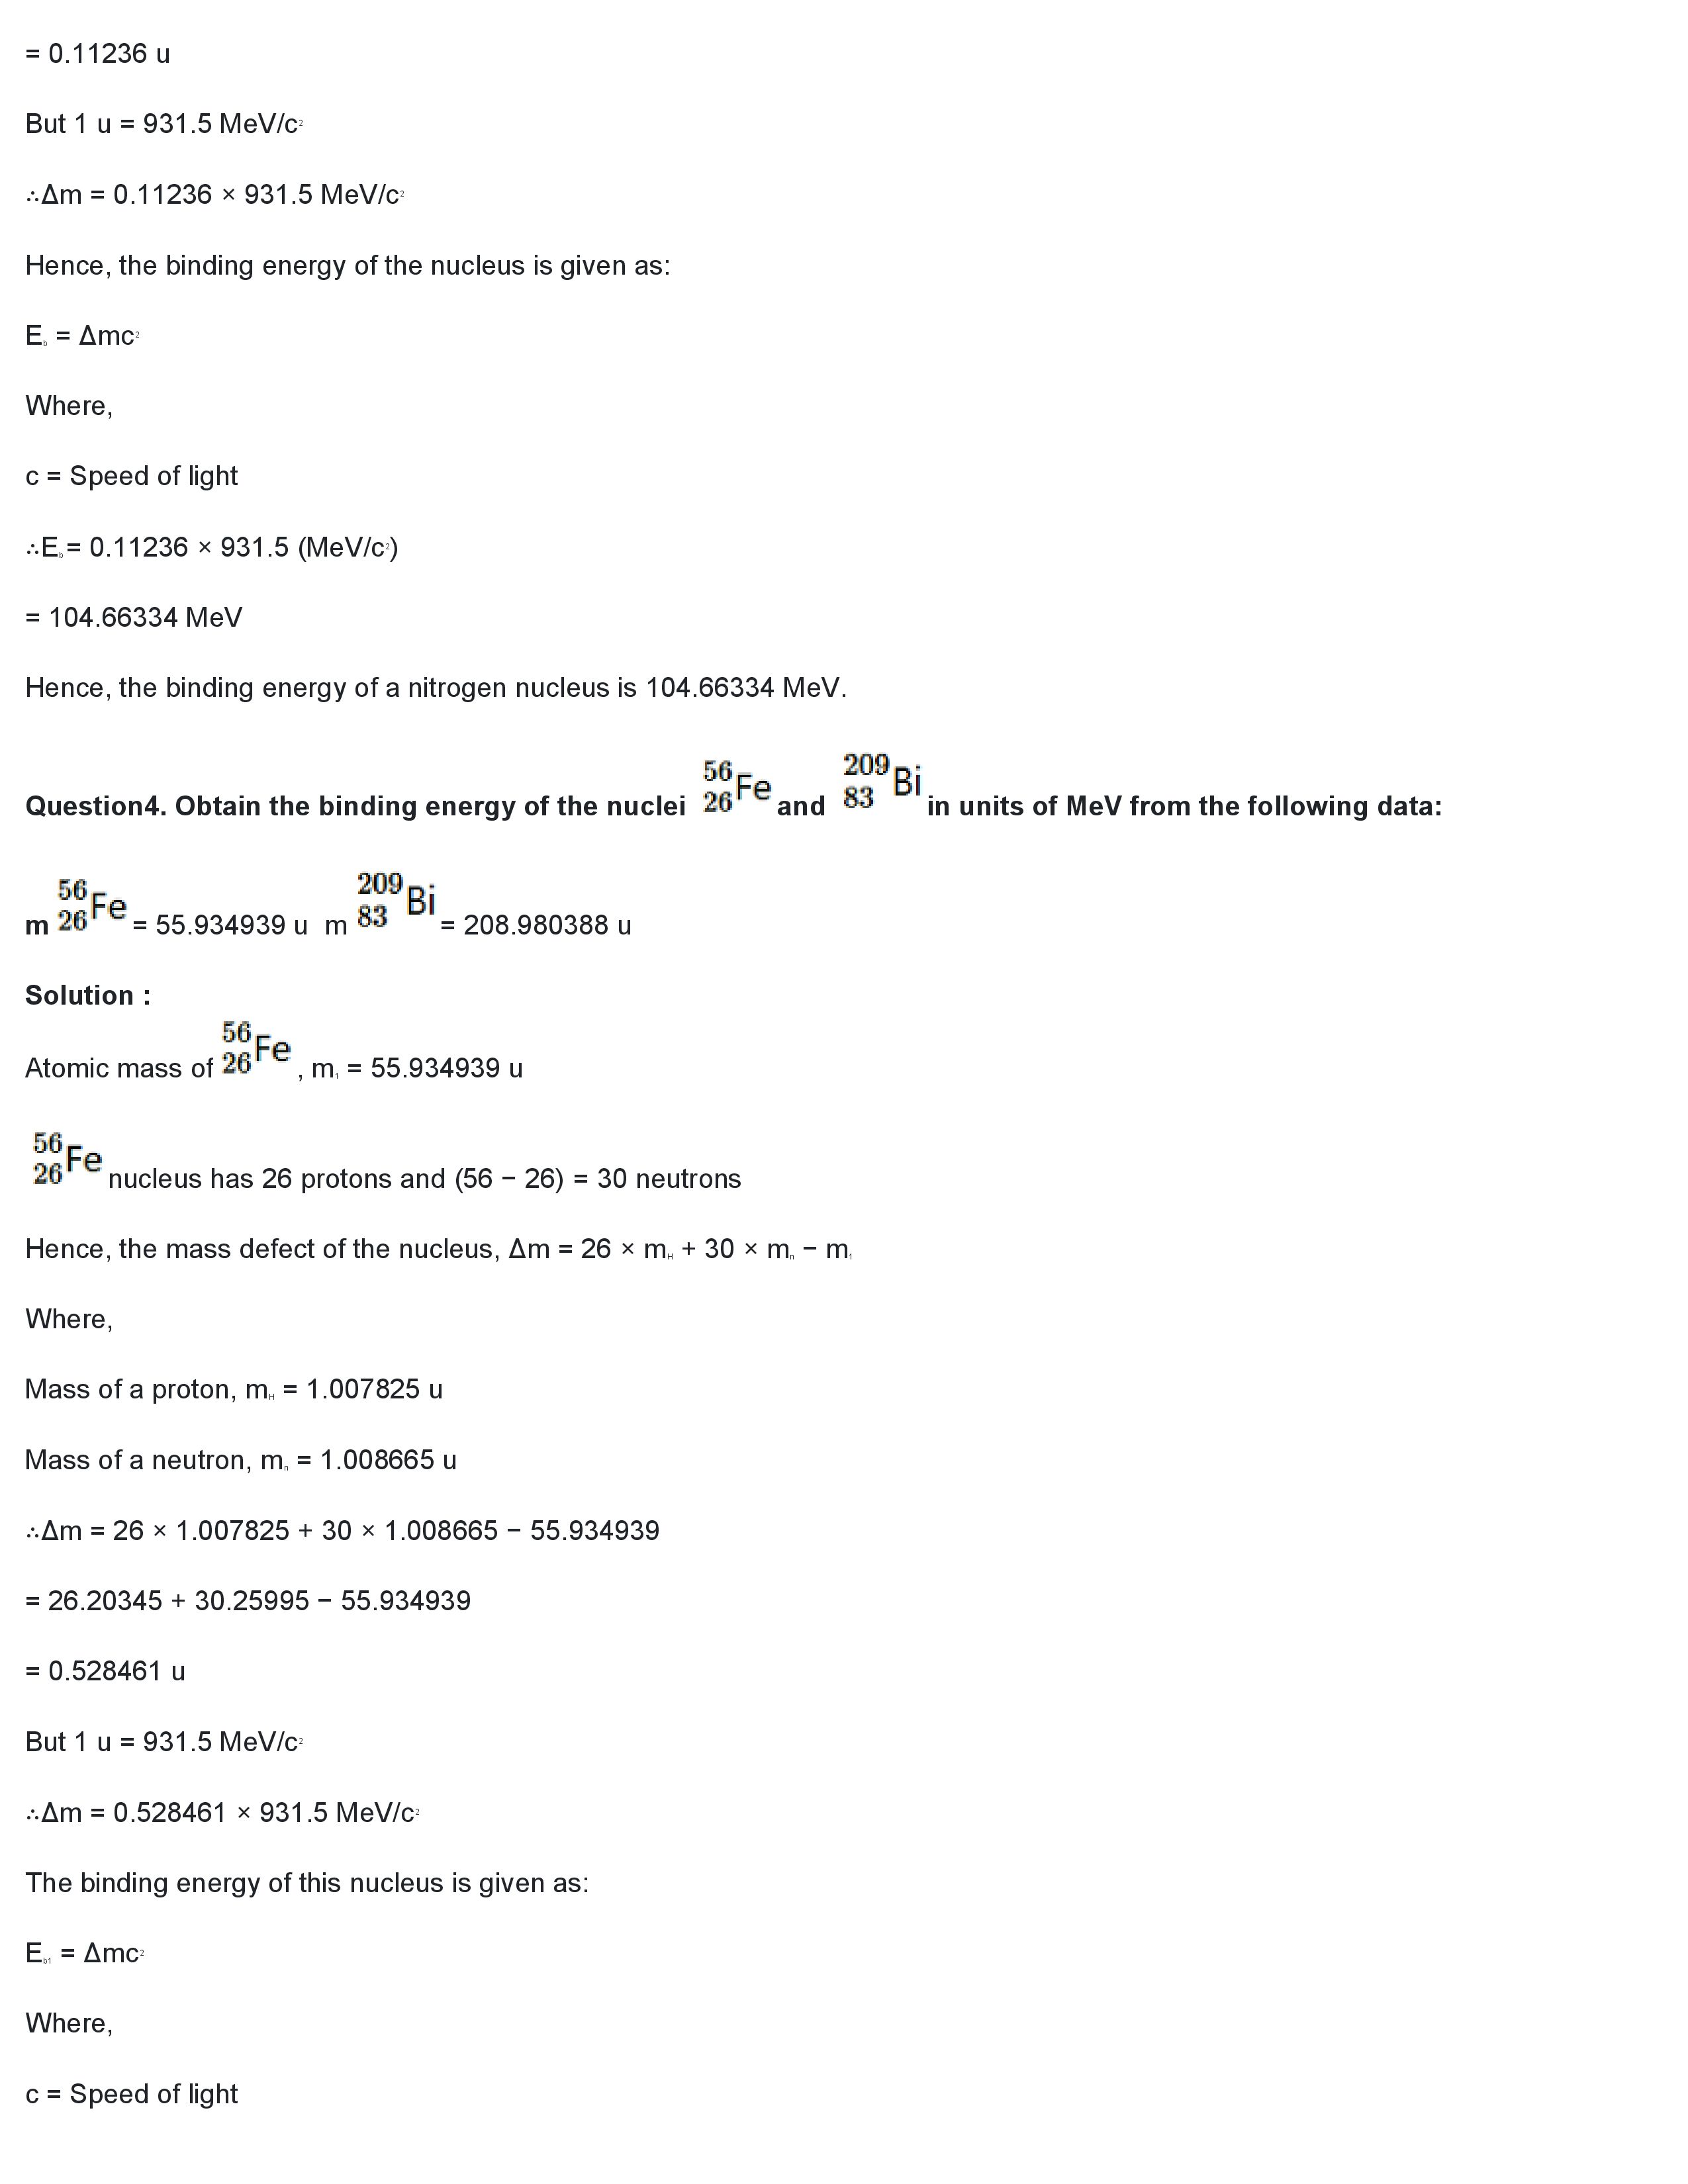 ""NCERT-Solutions-Class-12-Physics-Chapter-13-Nuclei-3